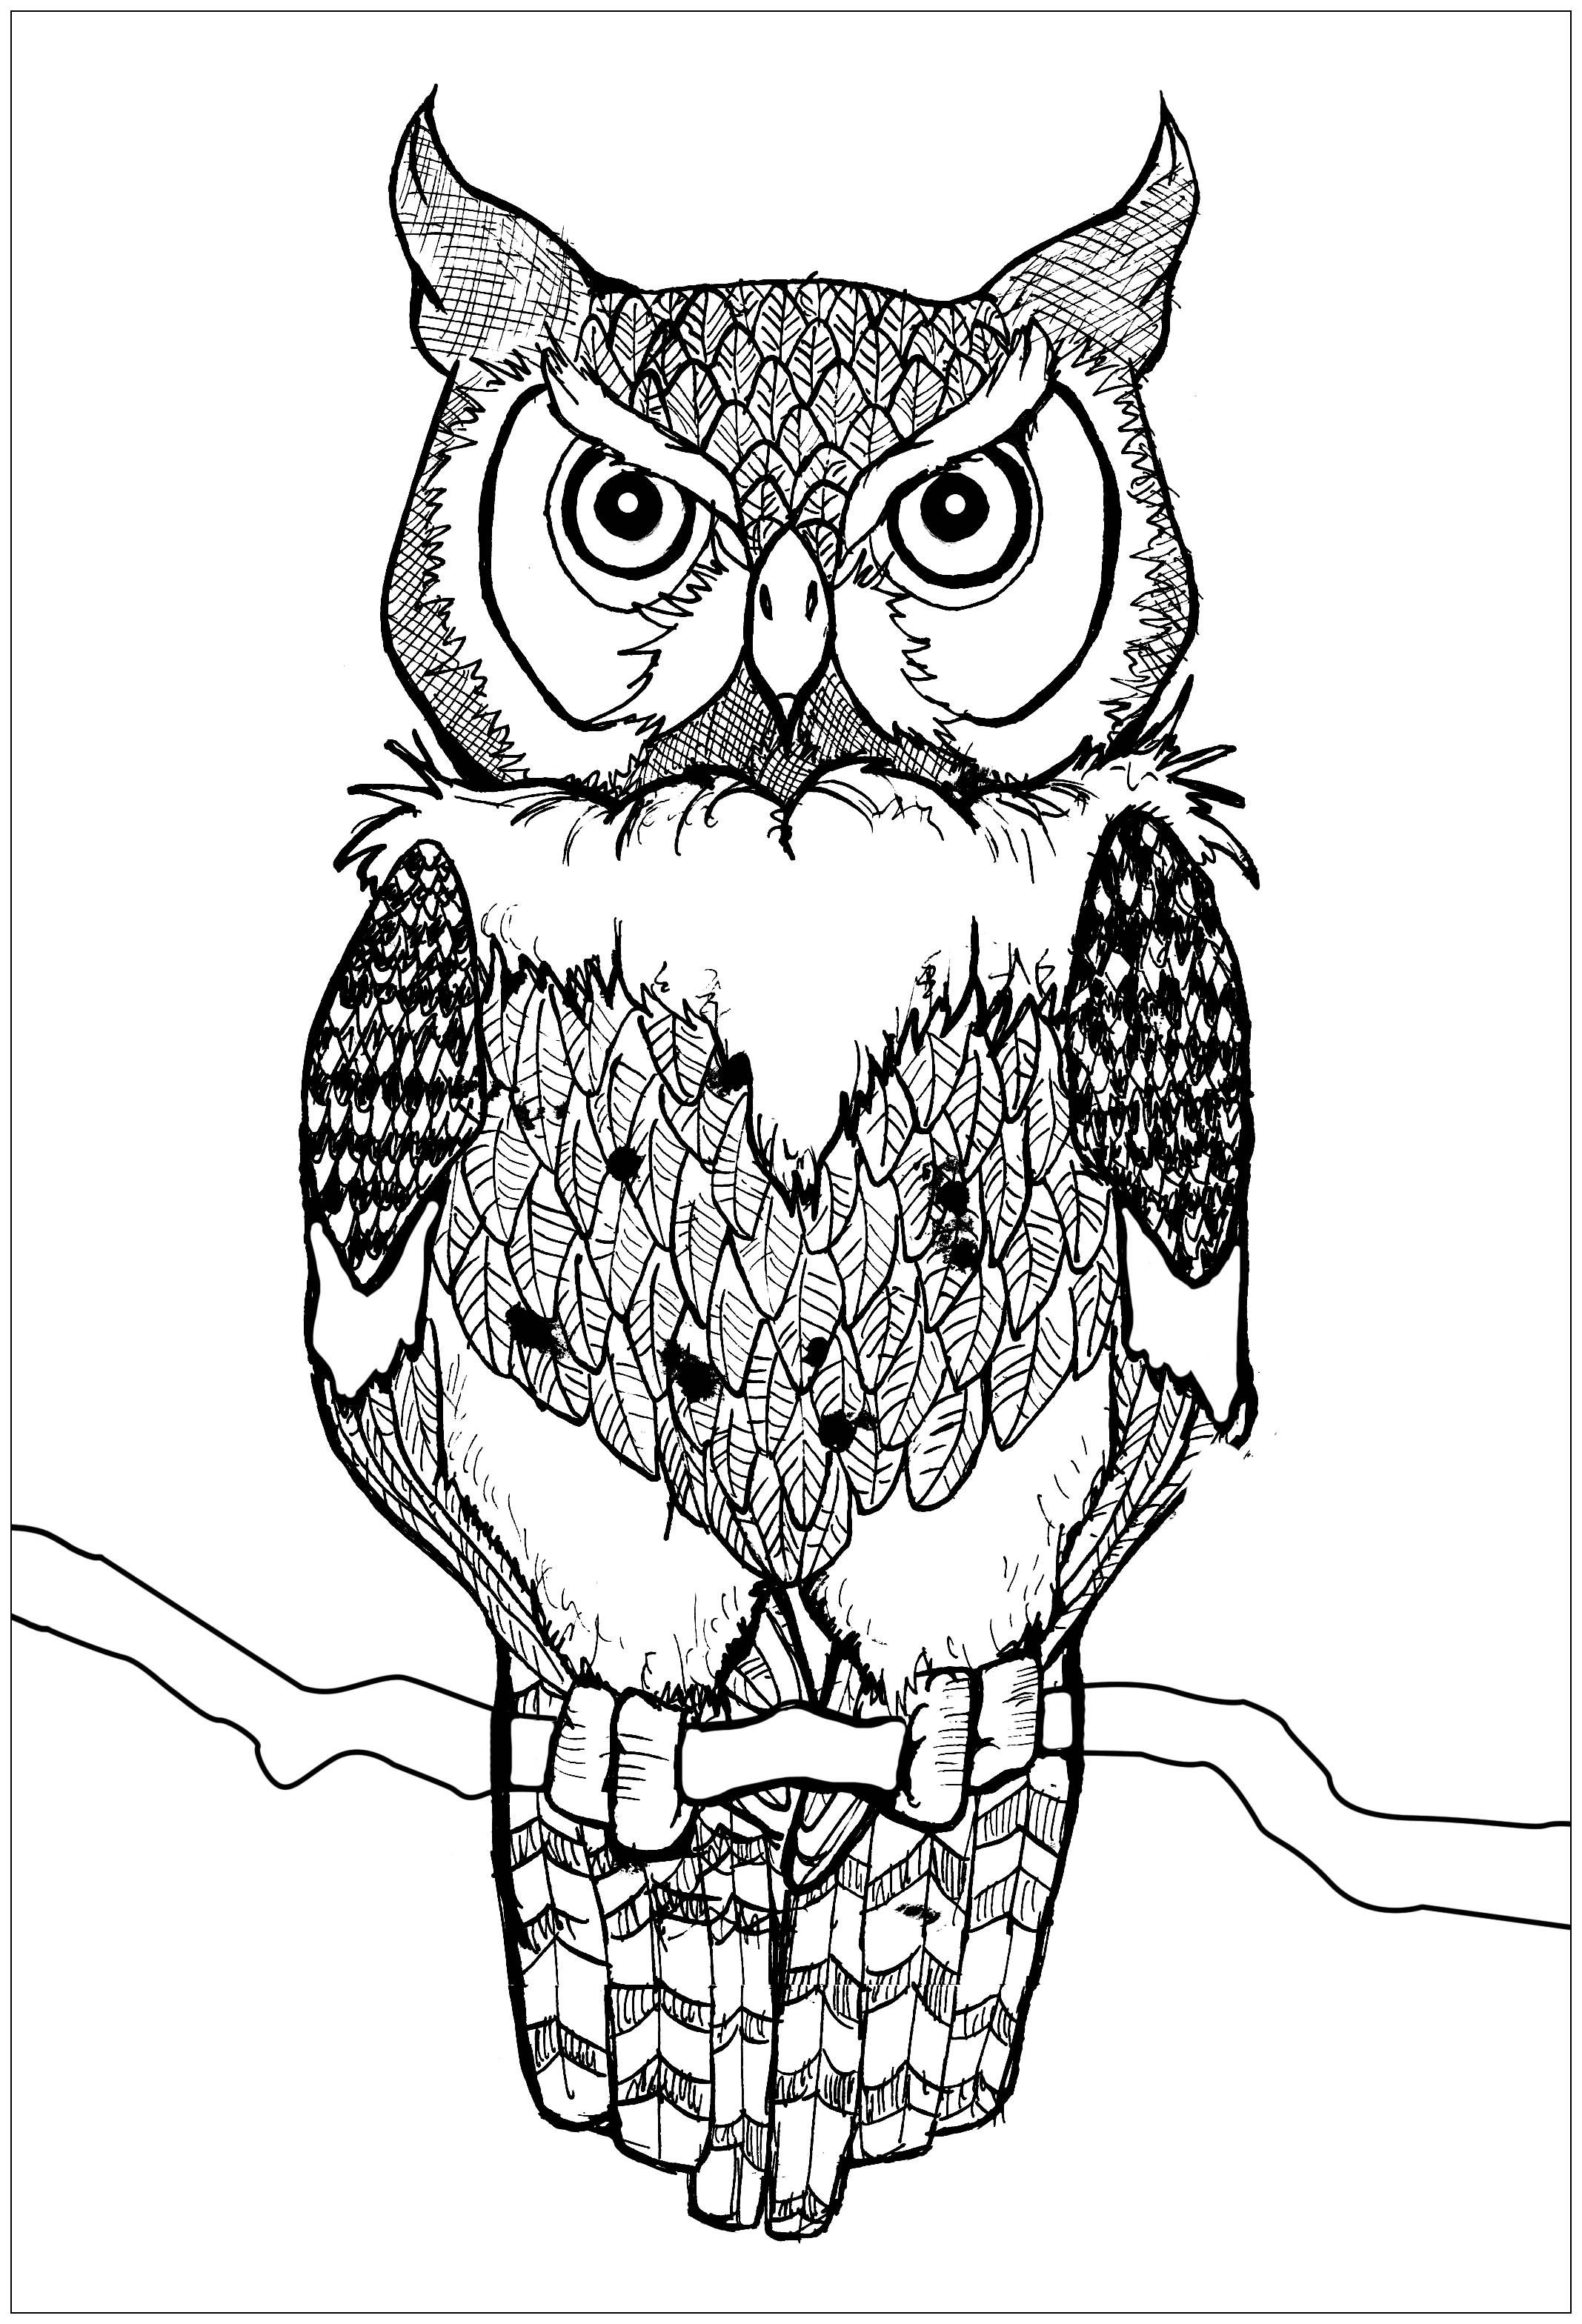 coloring-owl-colouring-page